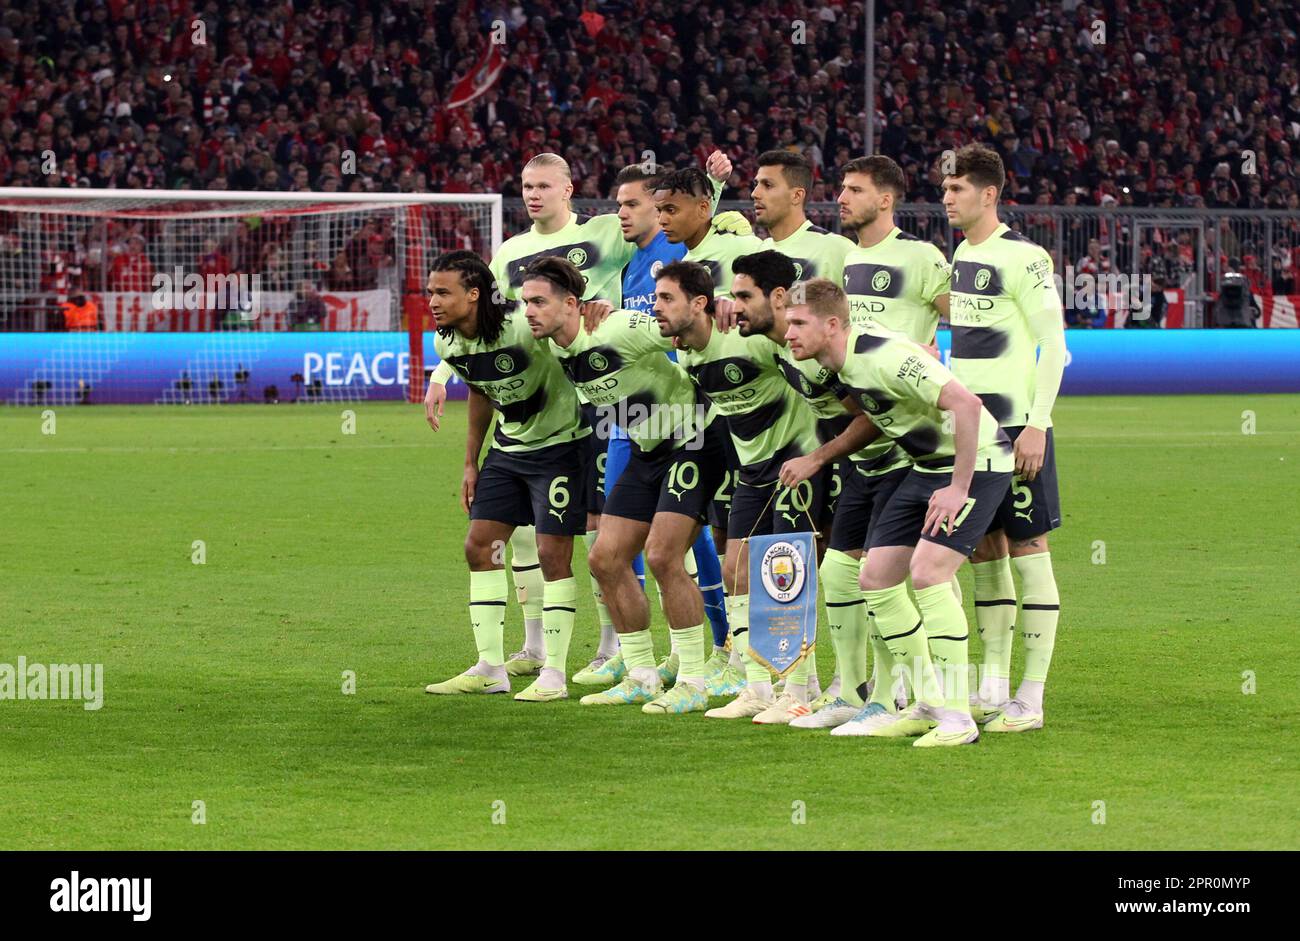 MUNICH, GERMANY - APRIL 19: Line Up of Manchester City rear row (L-R) #9 Erling HAALAND, # 31 EDERSON, kepper, #25 Manuel AKANJI, #16 RODRI, #3 Ruben DIAS, #5 John STONES - front row (L-R) #6 Nathan AKÉ, #10 Jack GREASLISH, #20 Bernardo SILVA, #8 Ilkay GÜNDOGAN, #17 Kevin De BRUYNE, before the UEFA Champions League quarterfinal second leg Football match between FC Bayern Muenchen and Manchester City at Allianz Arena on April 19, 2023 in Munich, Germany. Picture & copyright by Arthur THILL/ATP images (THILL Arthur/ATP/SPP) Credit: SPP Sport Press Photo. /Alamy Live News Stock Photo